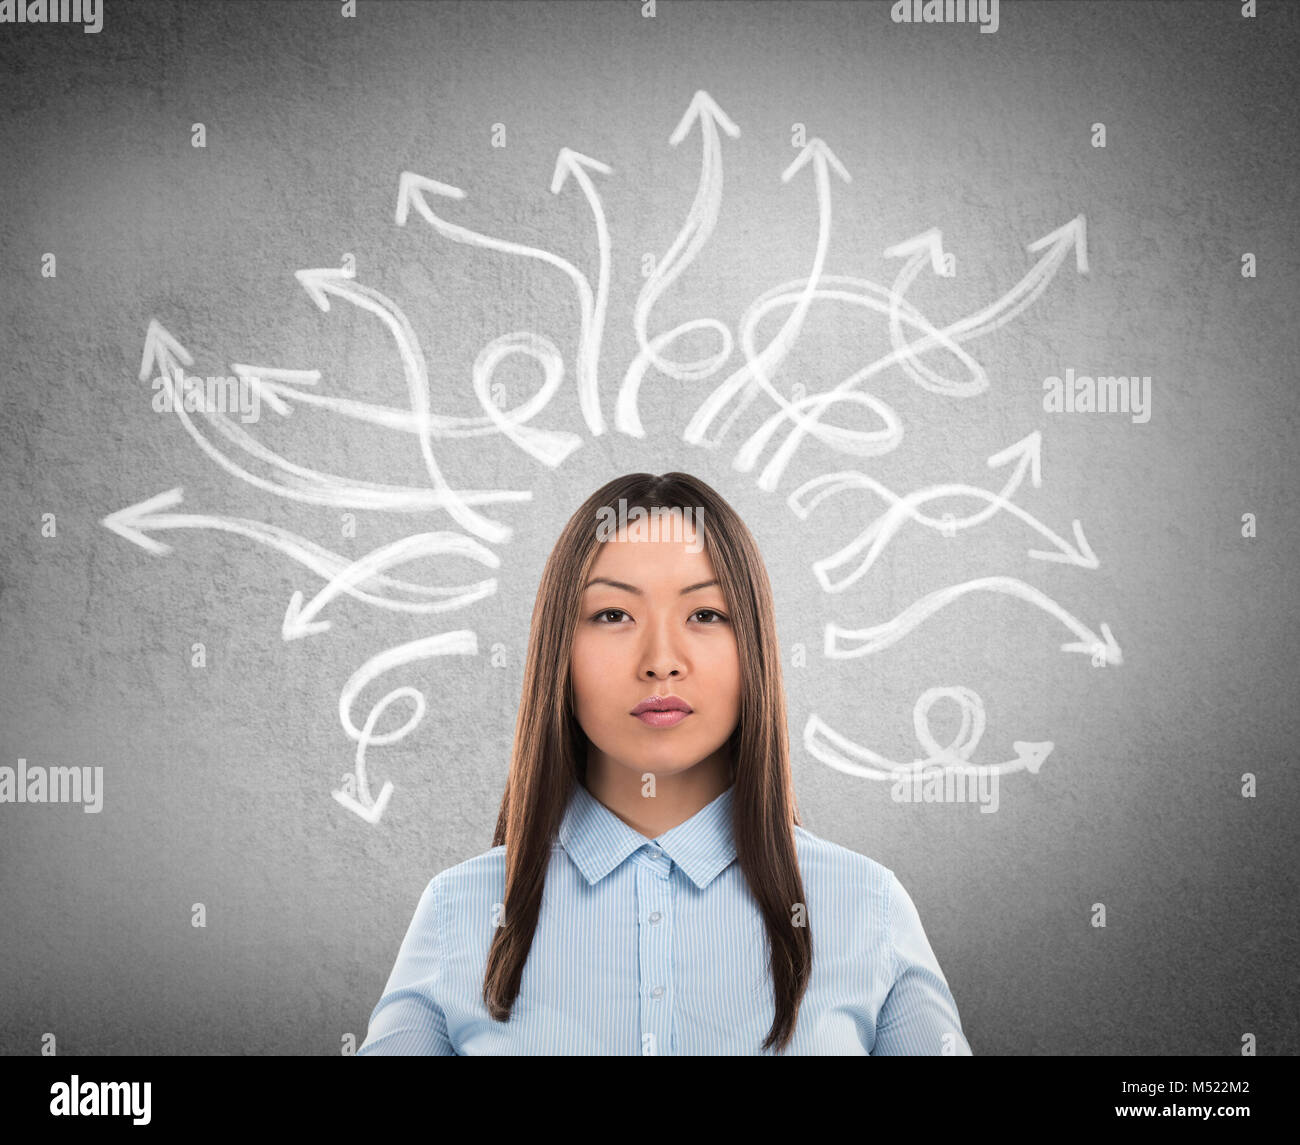 Serious, young businesswoman with many twisted arrows on the concrete wall overhead Stock Photo